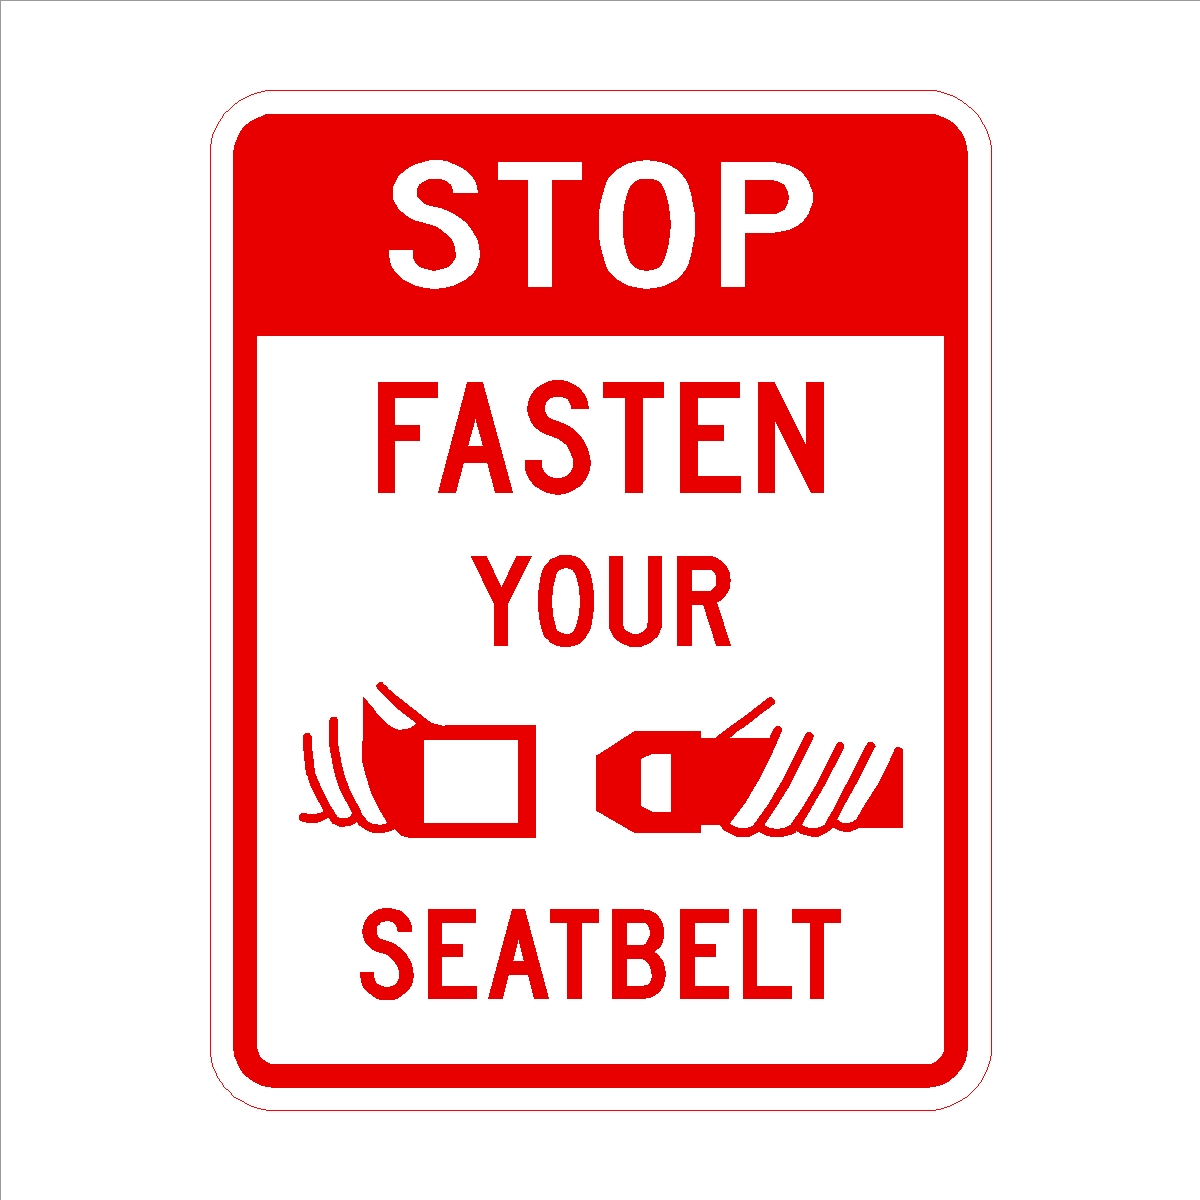 This fasten seat belt sign is hard to ignore. Install one to get more  people wearing seatbelts on your road. - Graphic makes your point clearly  and